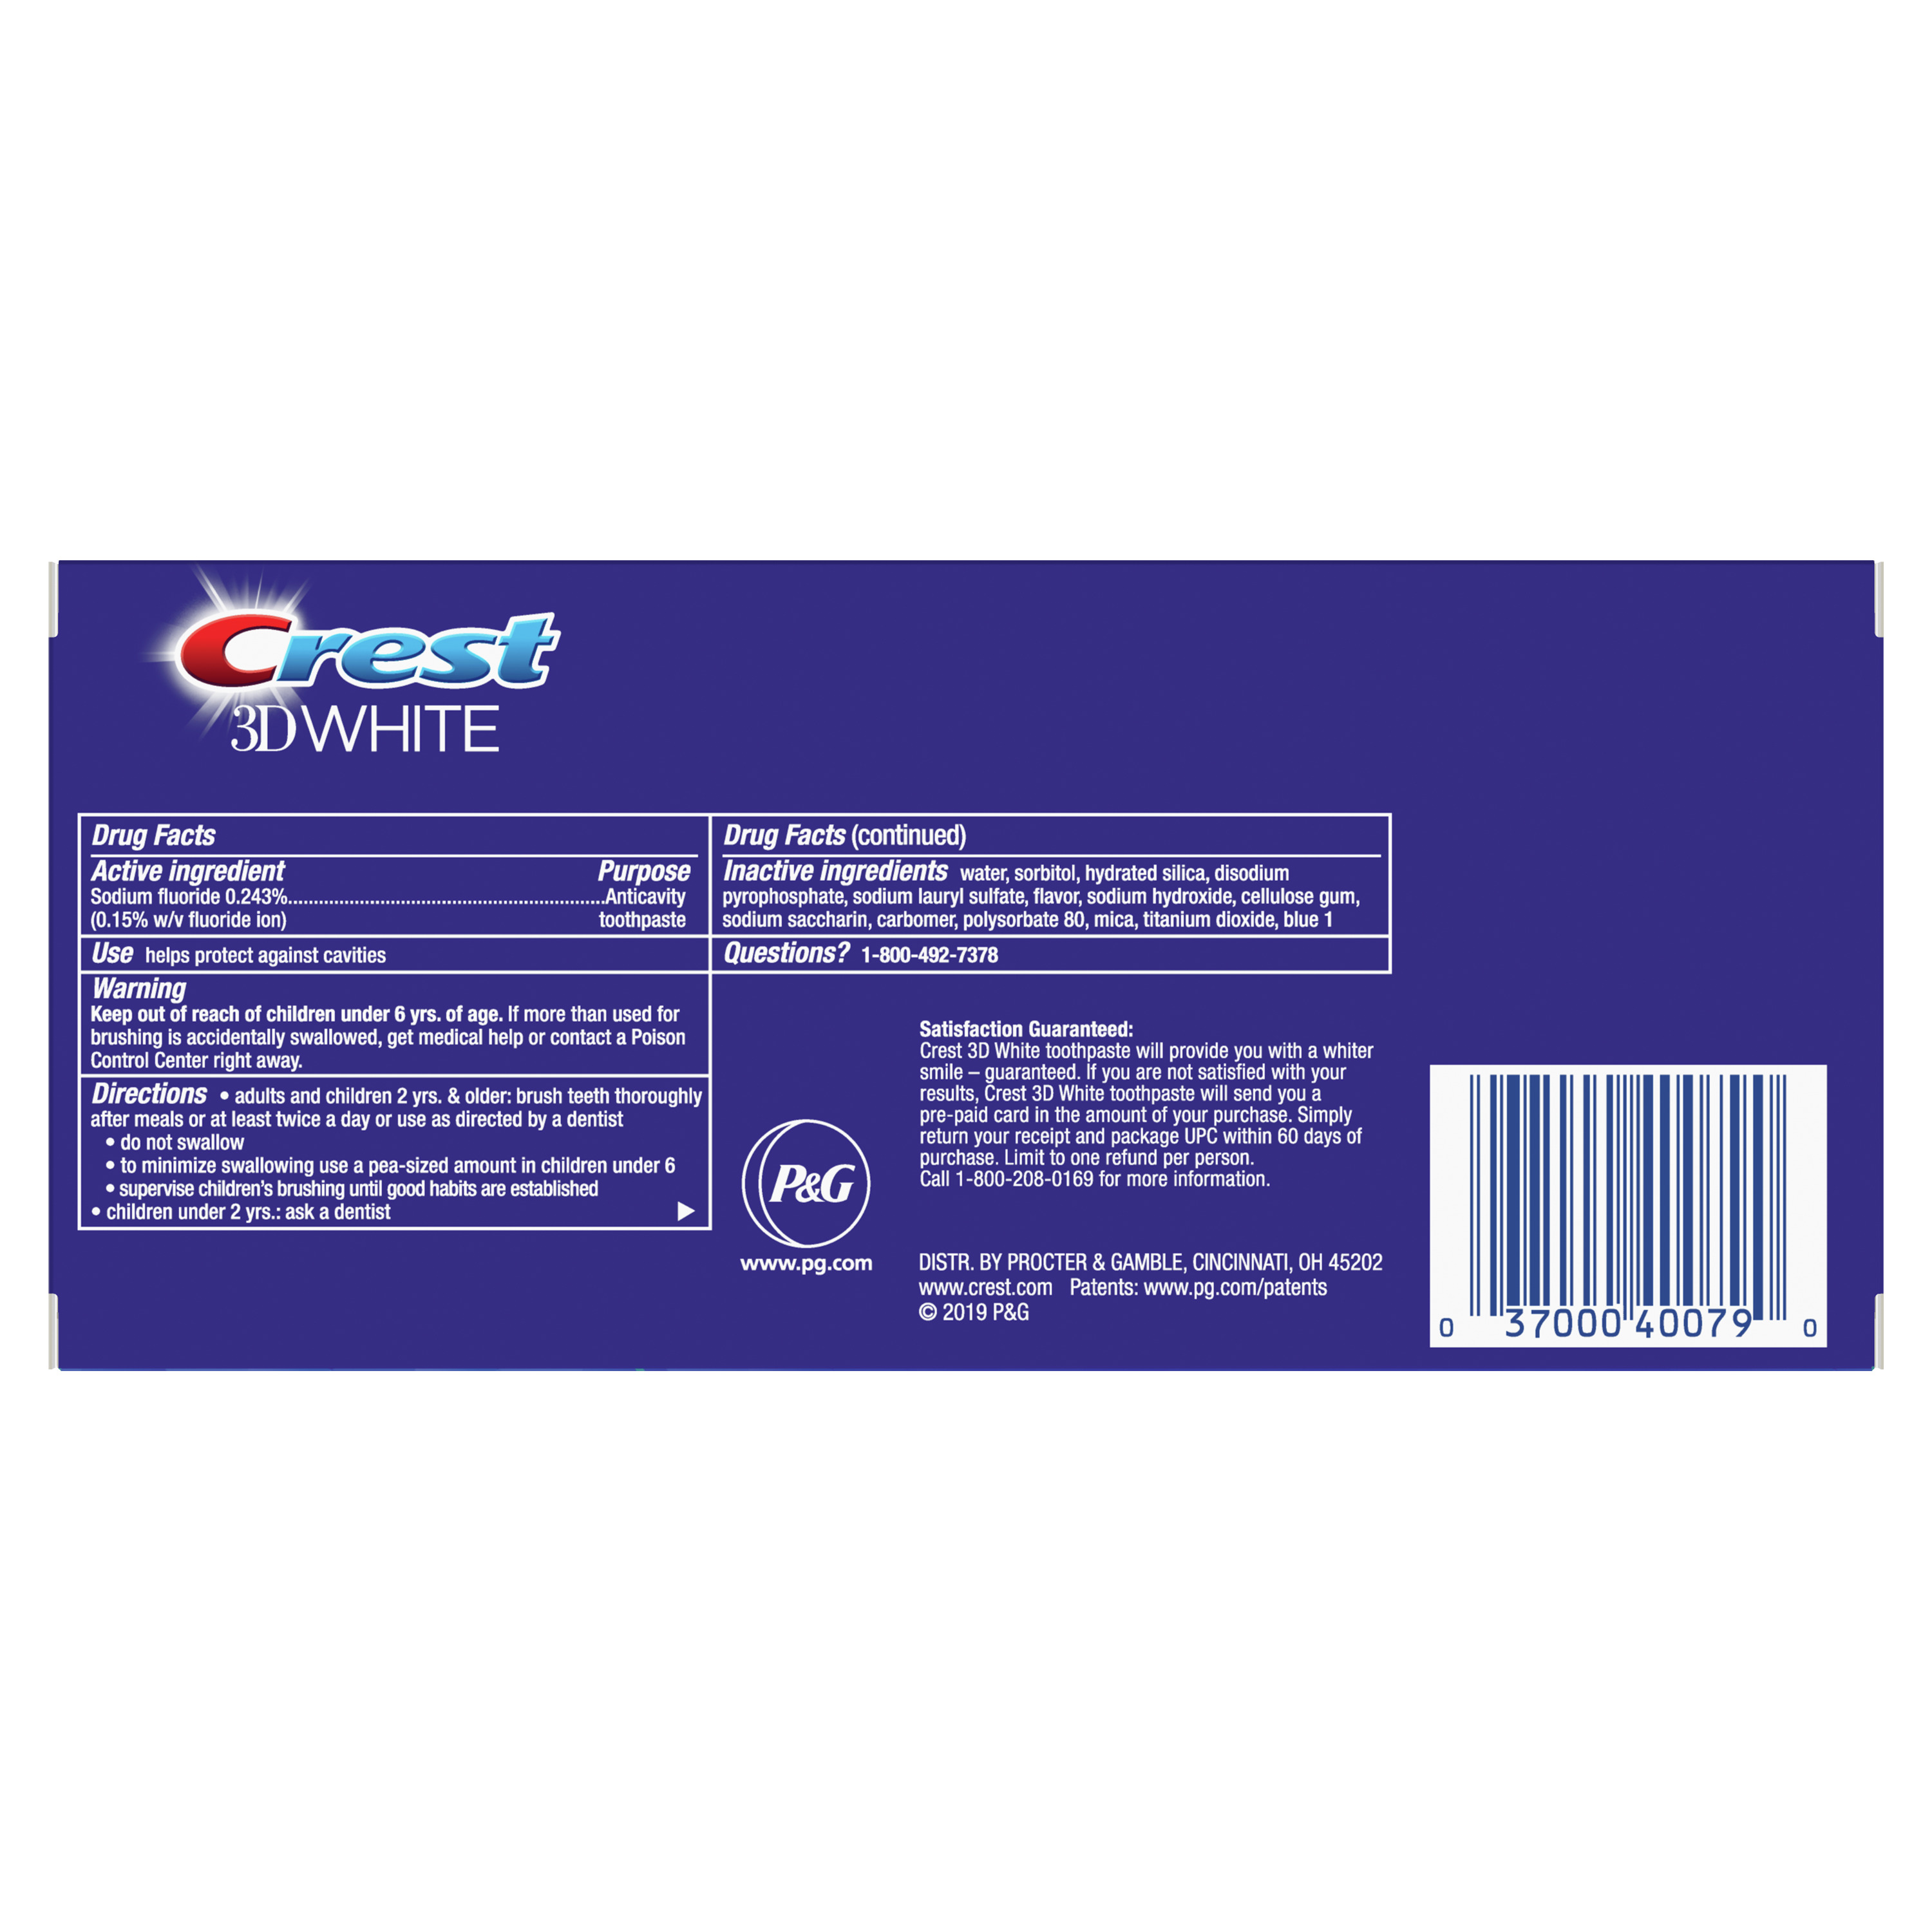 Crest 3D White, Whitening Toothpaste Deep Clean, 4.1 oz, Pack of 2 - image 2 of 5